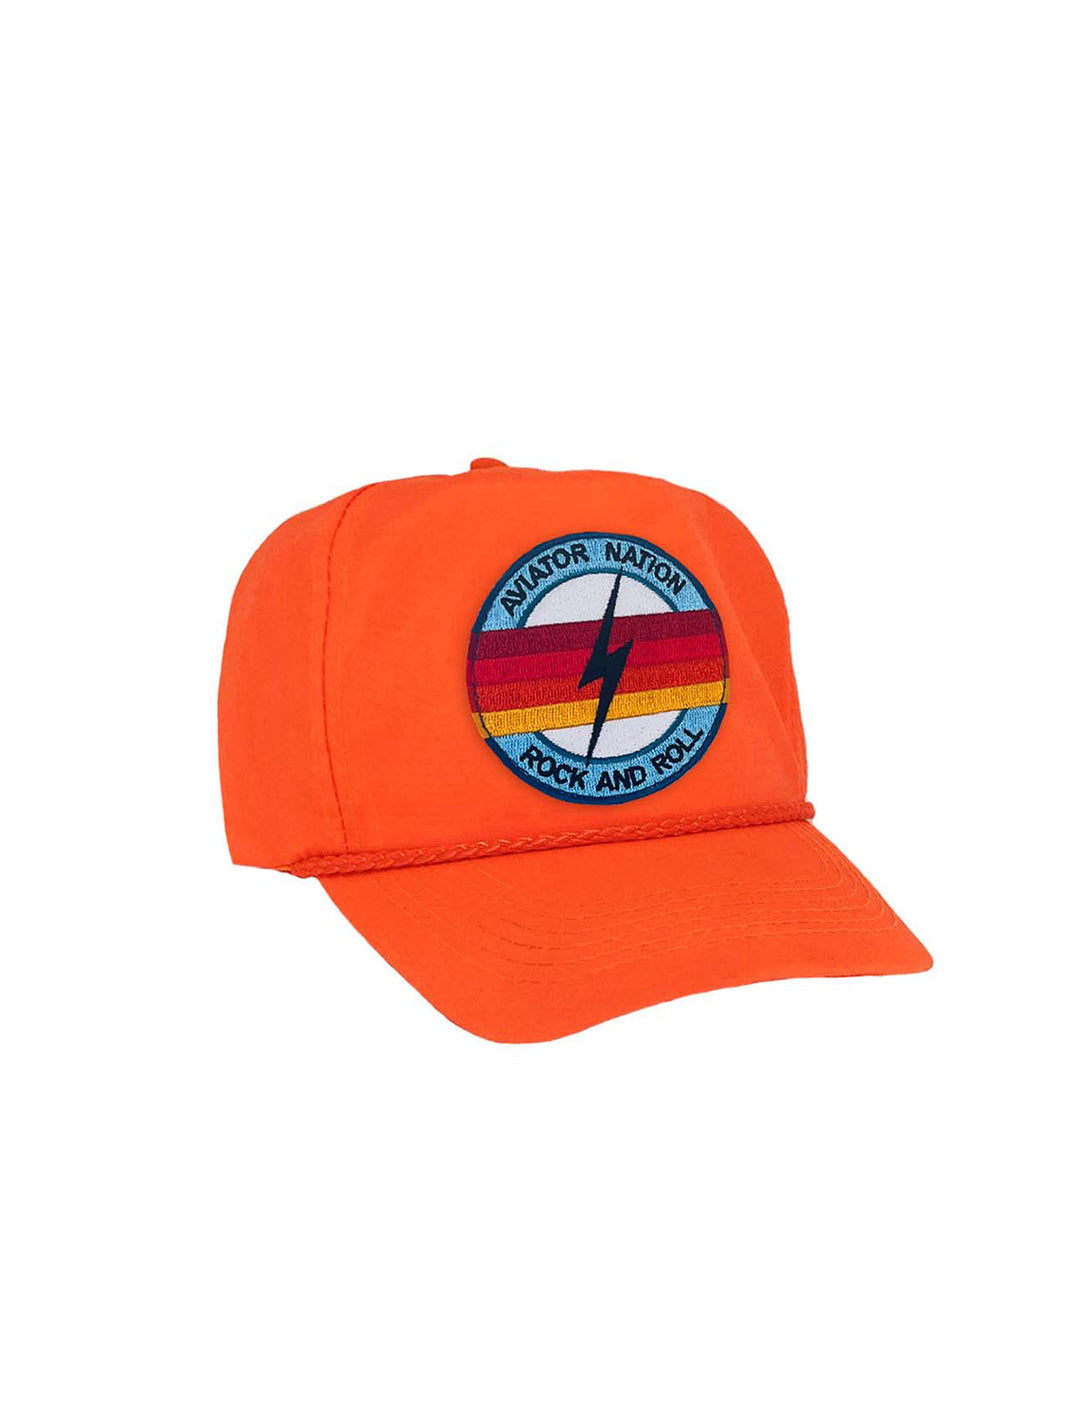 Front angle view of Aviator Nation's rock and roll vintage nylon trucker hat in neon orange.